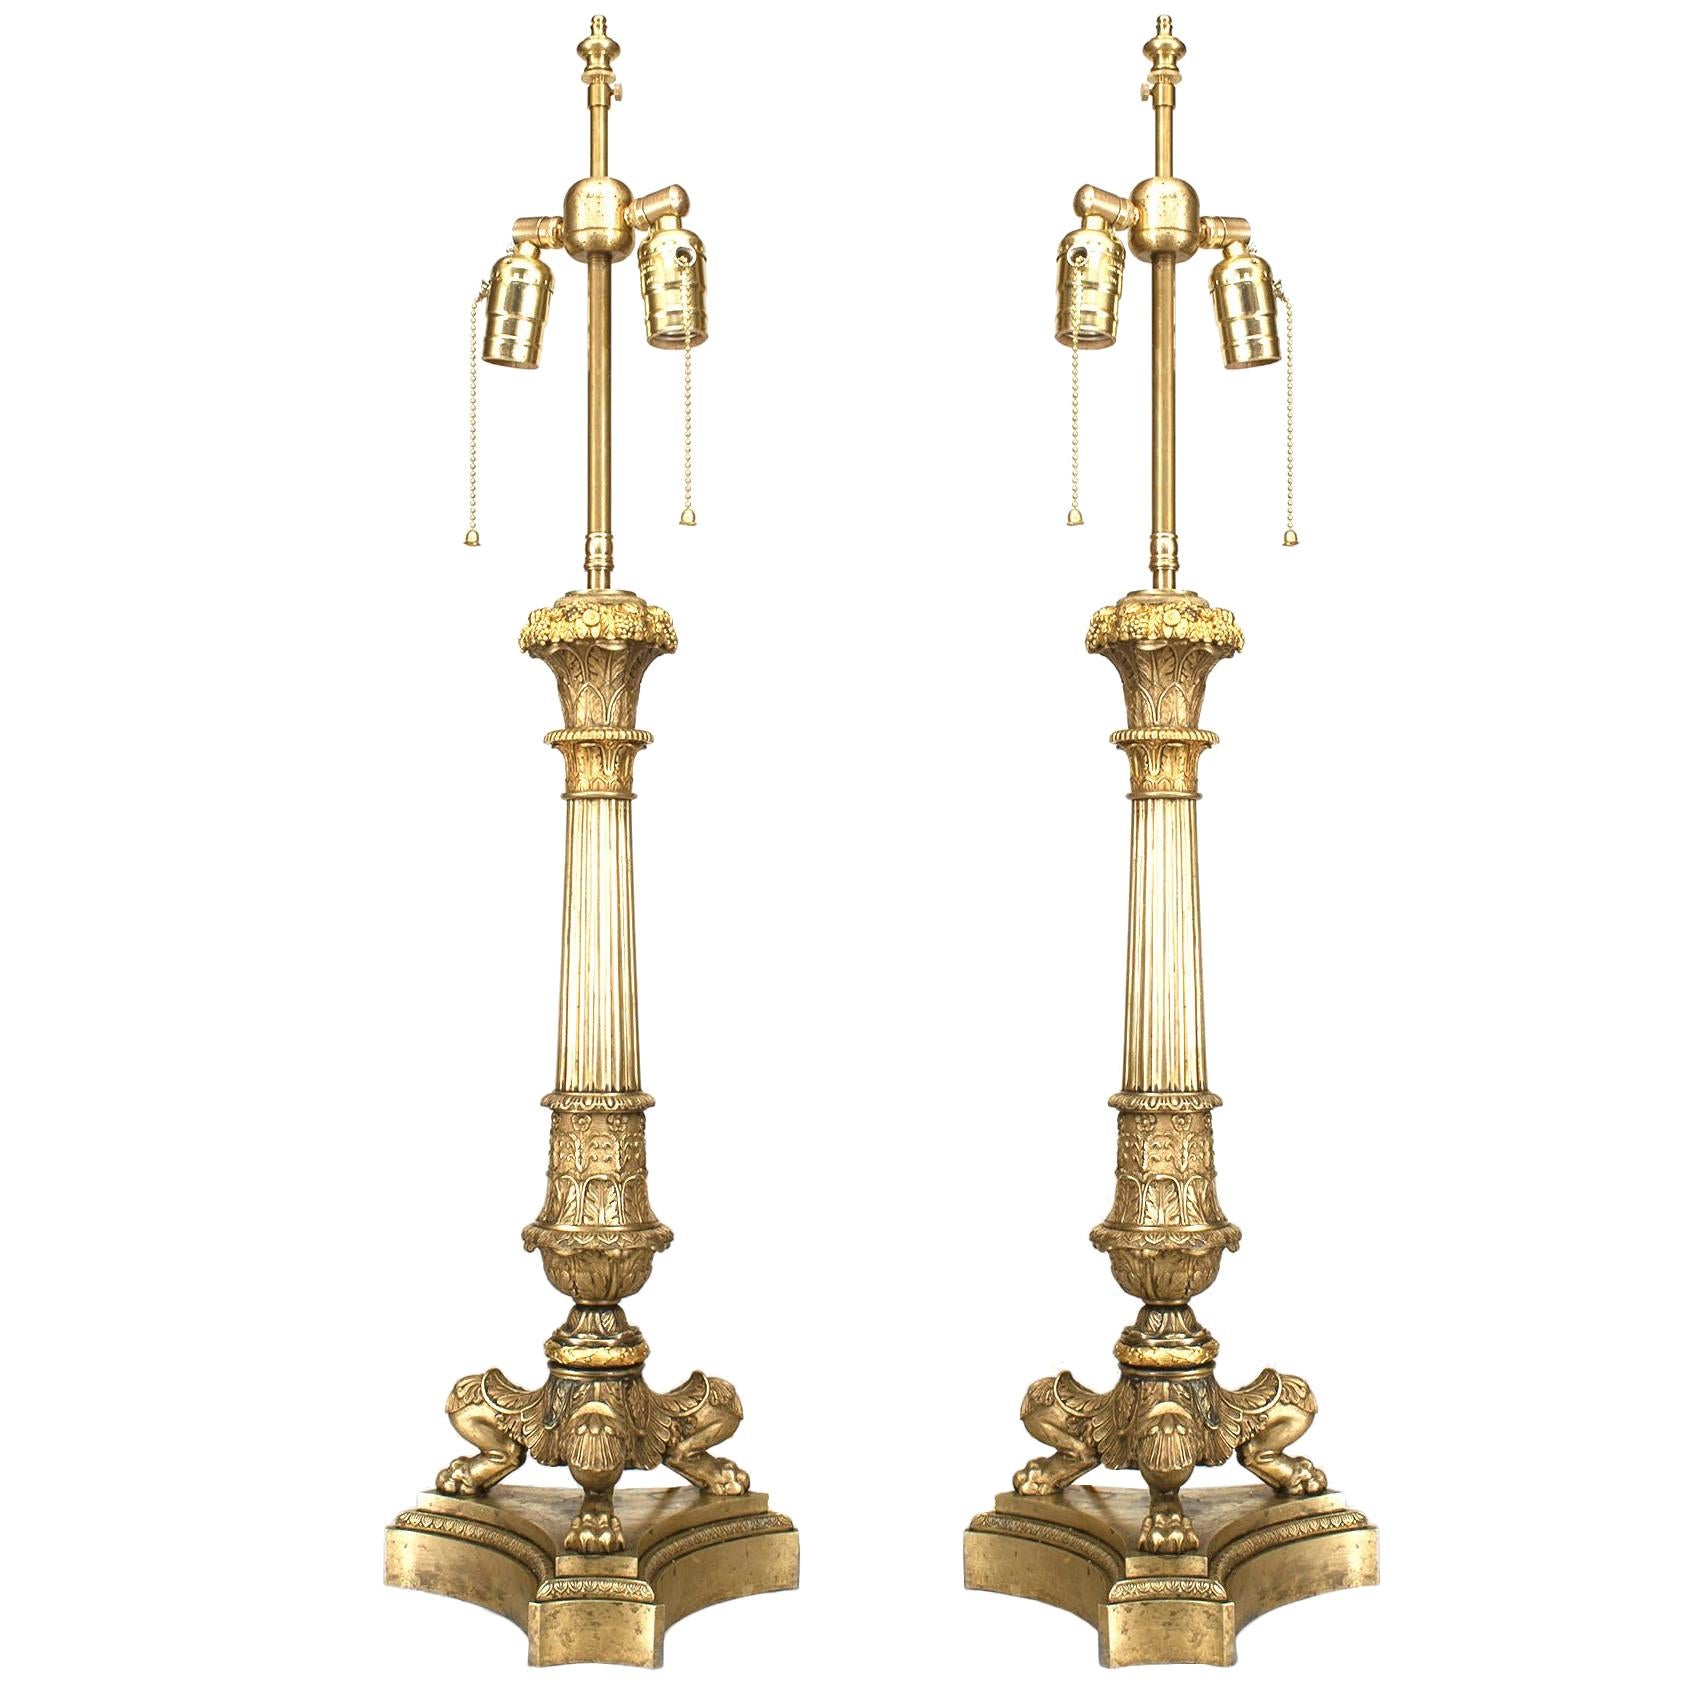 Pair of French Louis XVI Style 19th Century Gilt Bronze Table Lamps